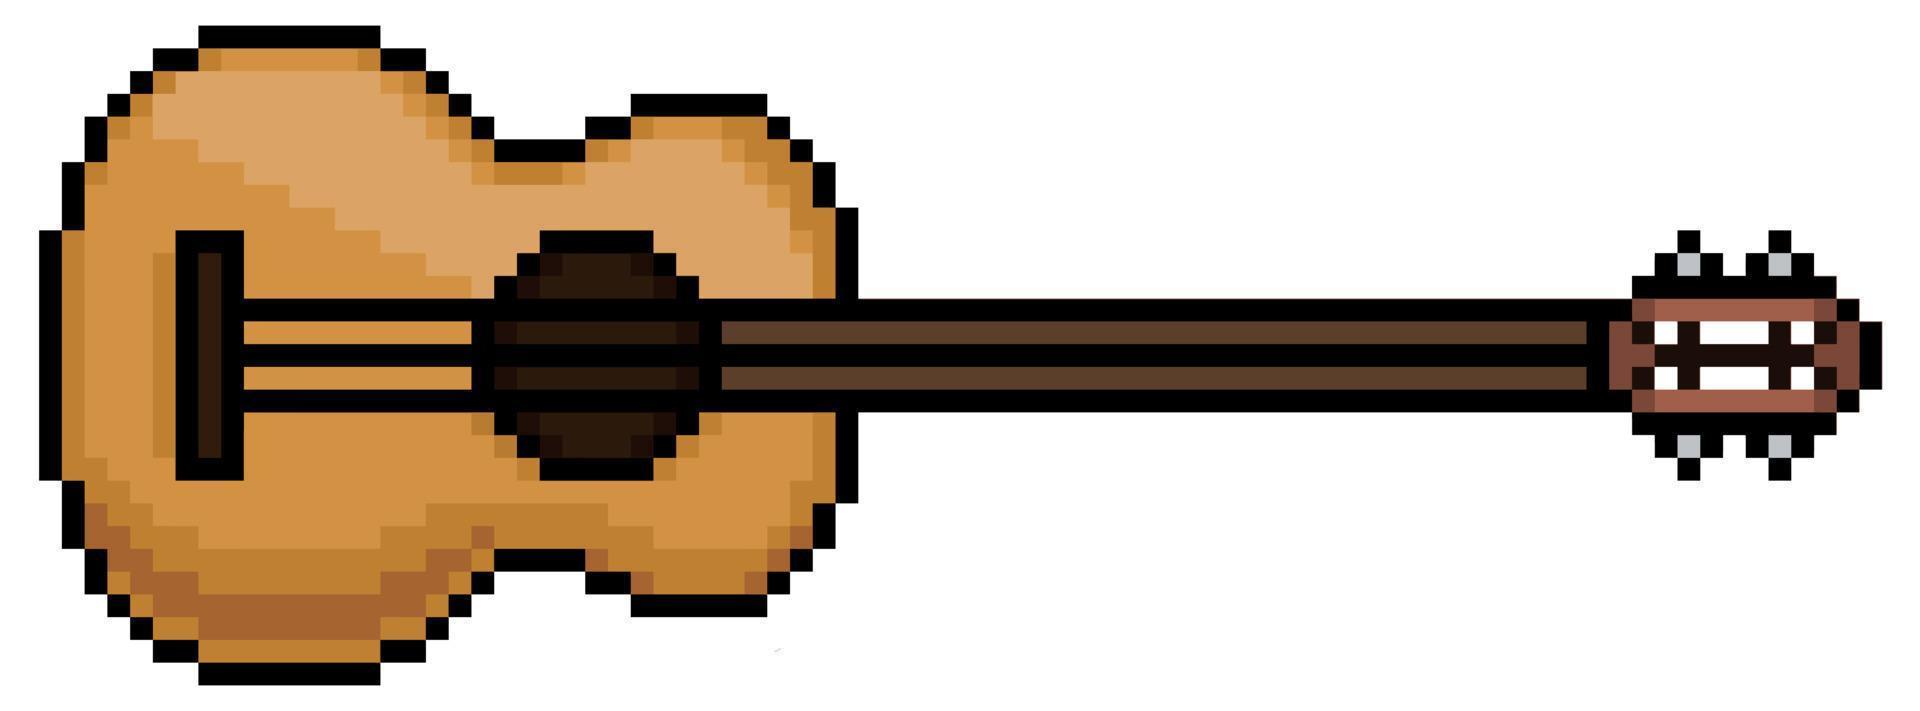 Pixel art guitar musical instrument vector icon for 8bit game on white background